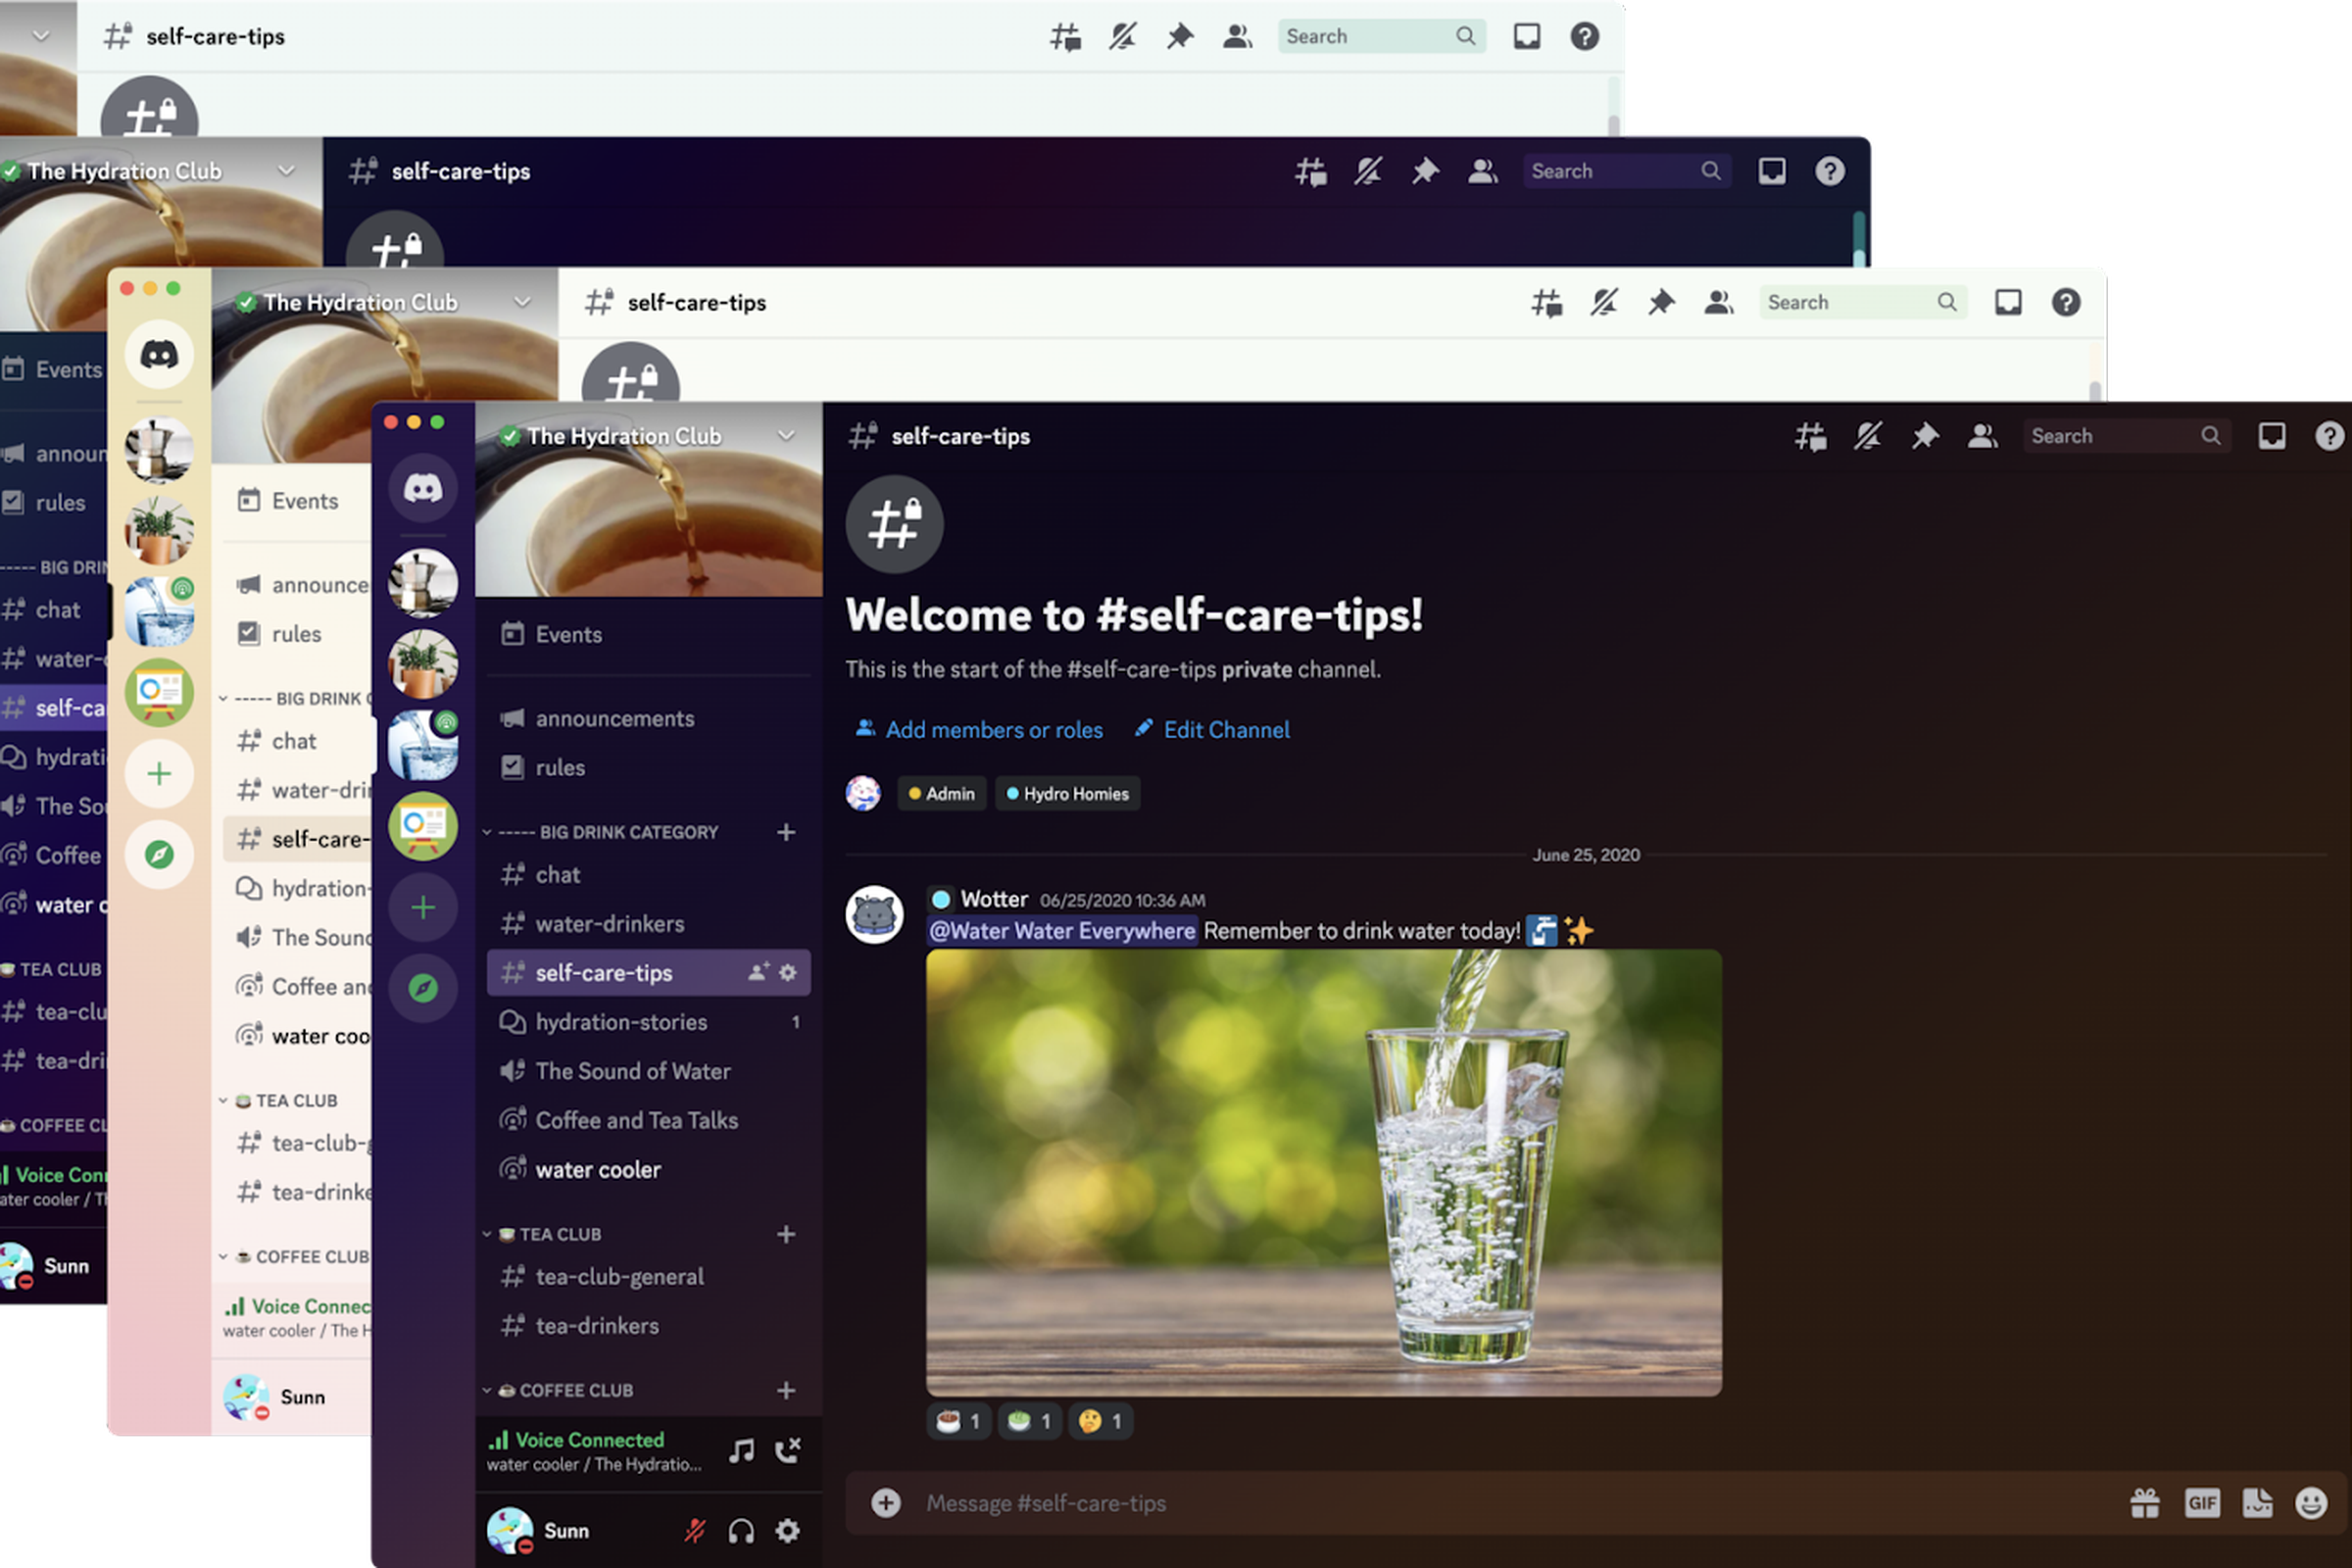 Series of screenshots showing the Discord UI in different colors.